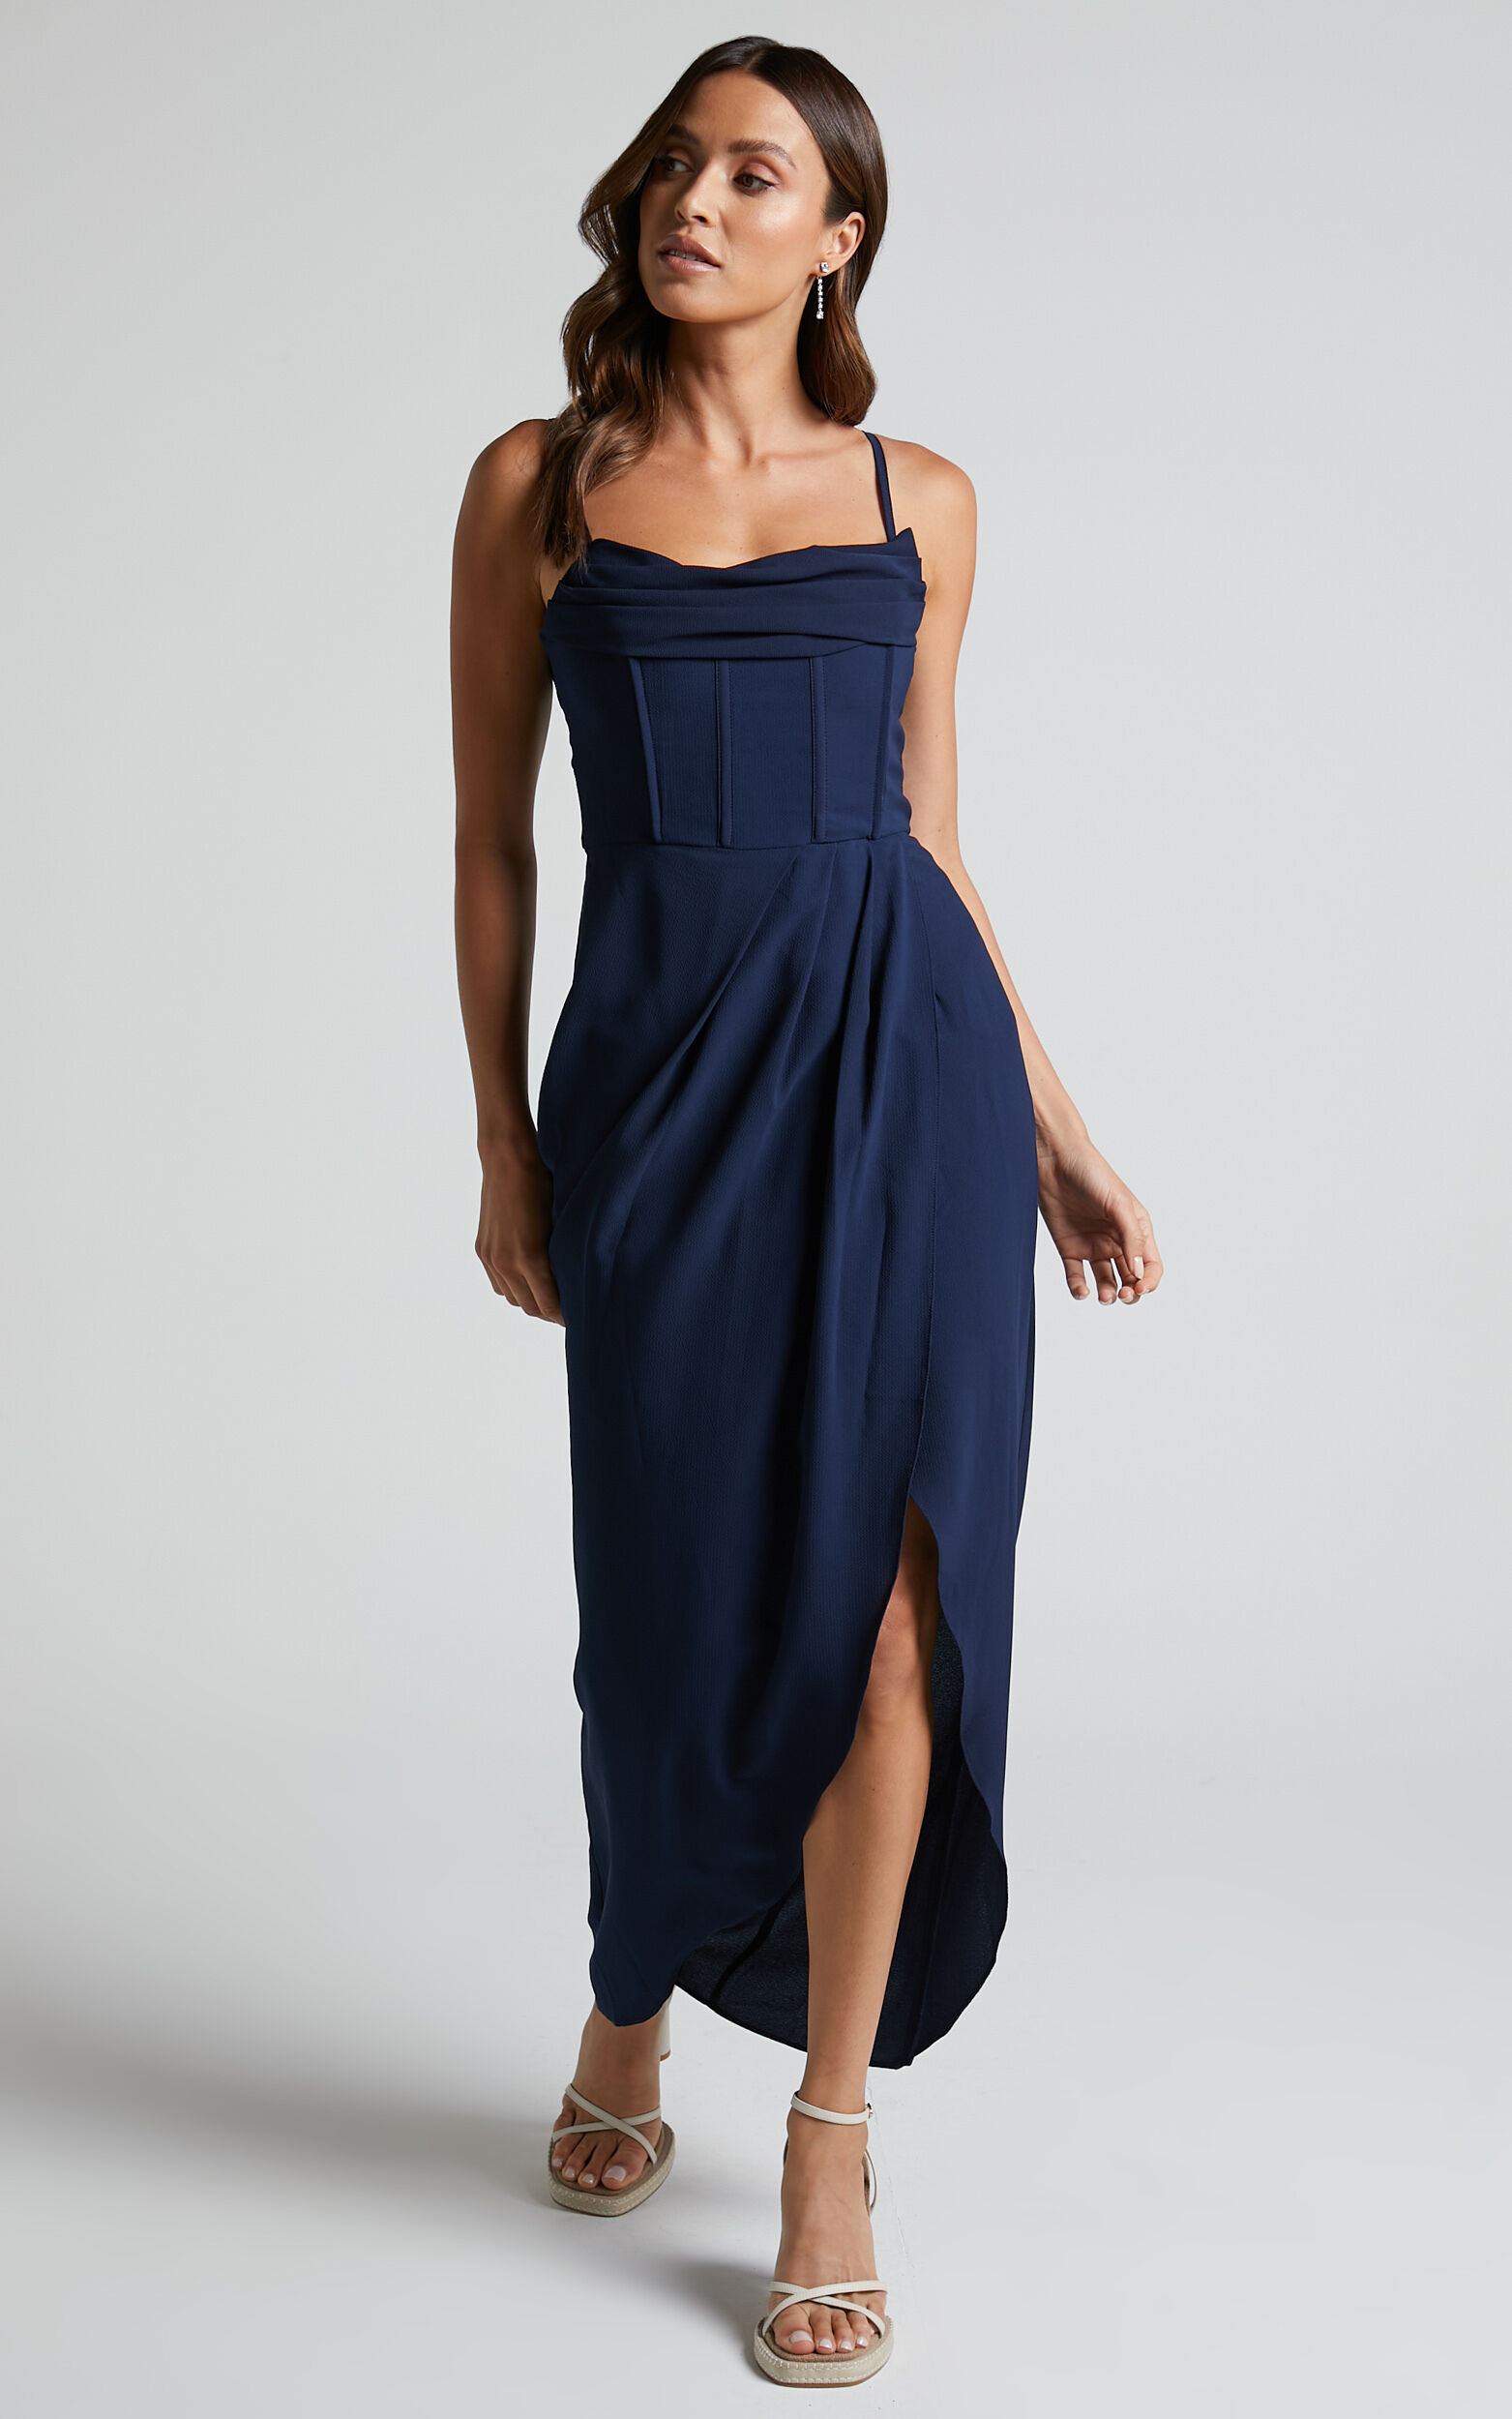 Andrina Midi Dress -  High Low Wrap Corset Dress in Navy - 04, NVY2, super-hi-res image number null